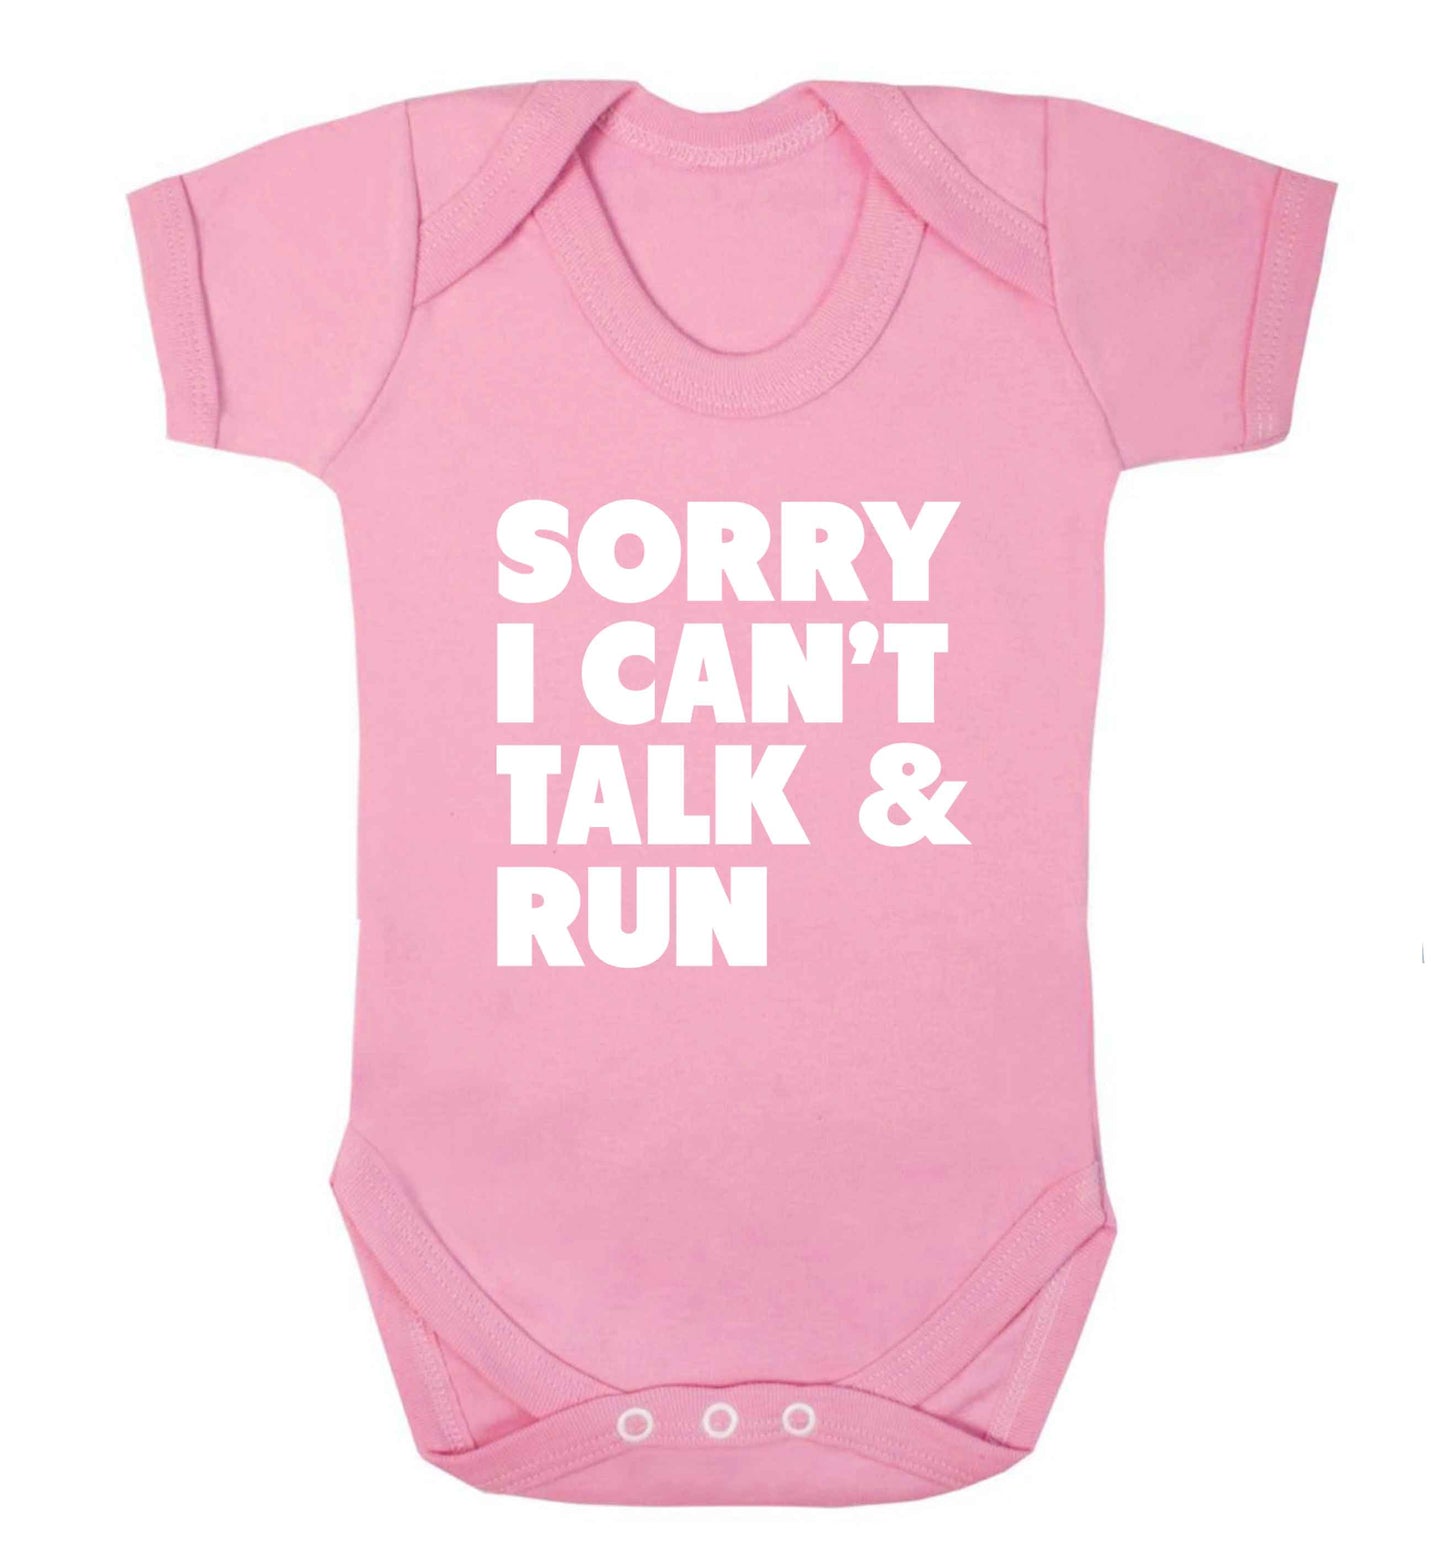 Sorry I can't talk and run baby vest pale pink 18-24 months